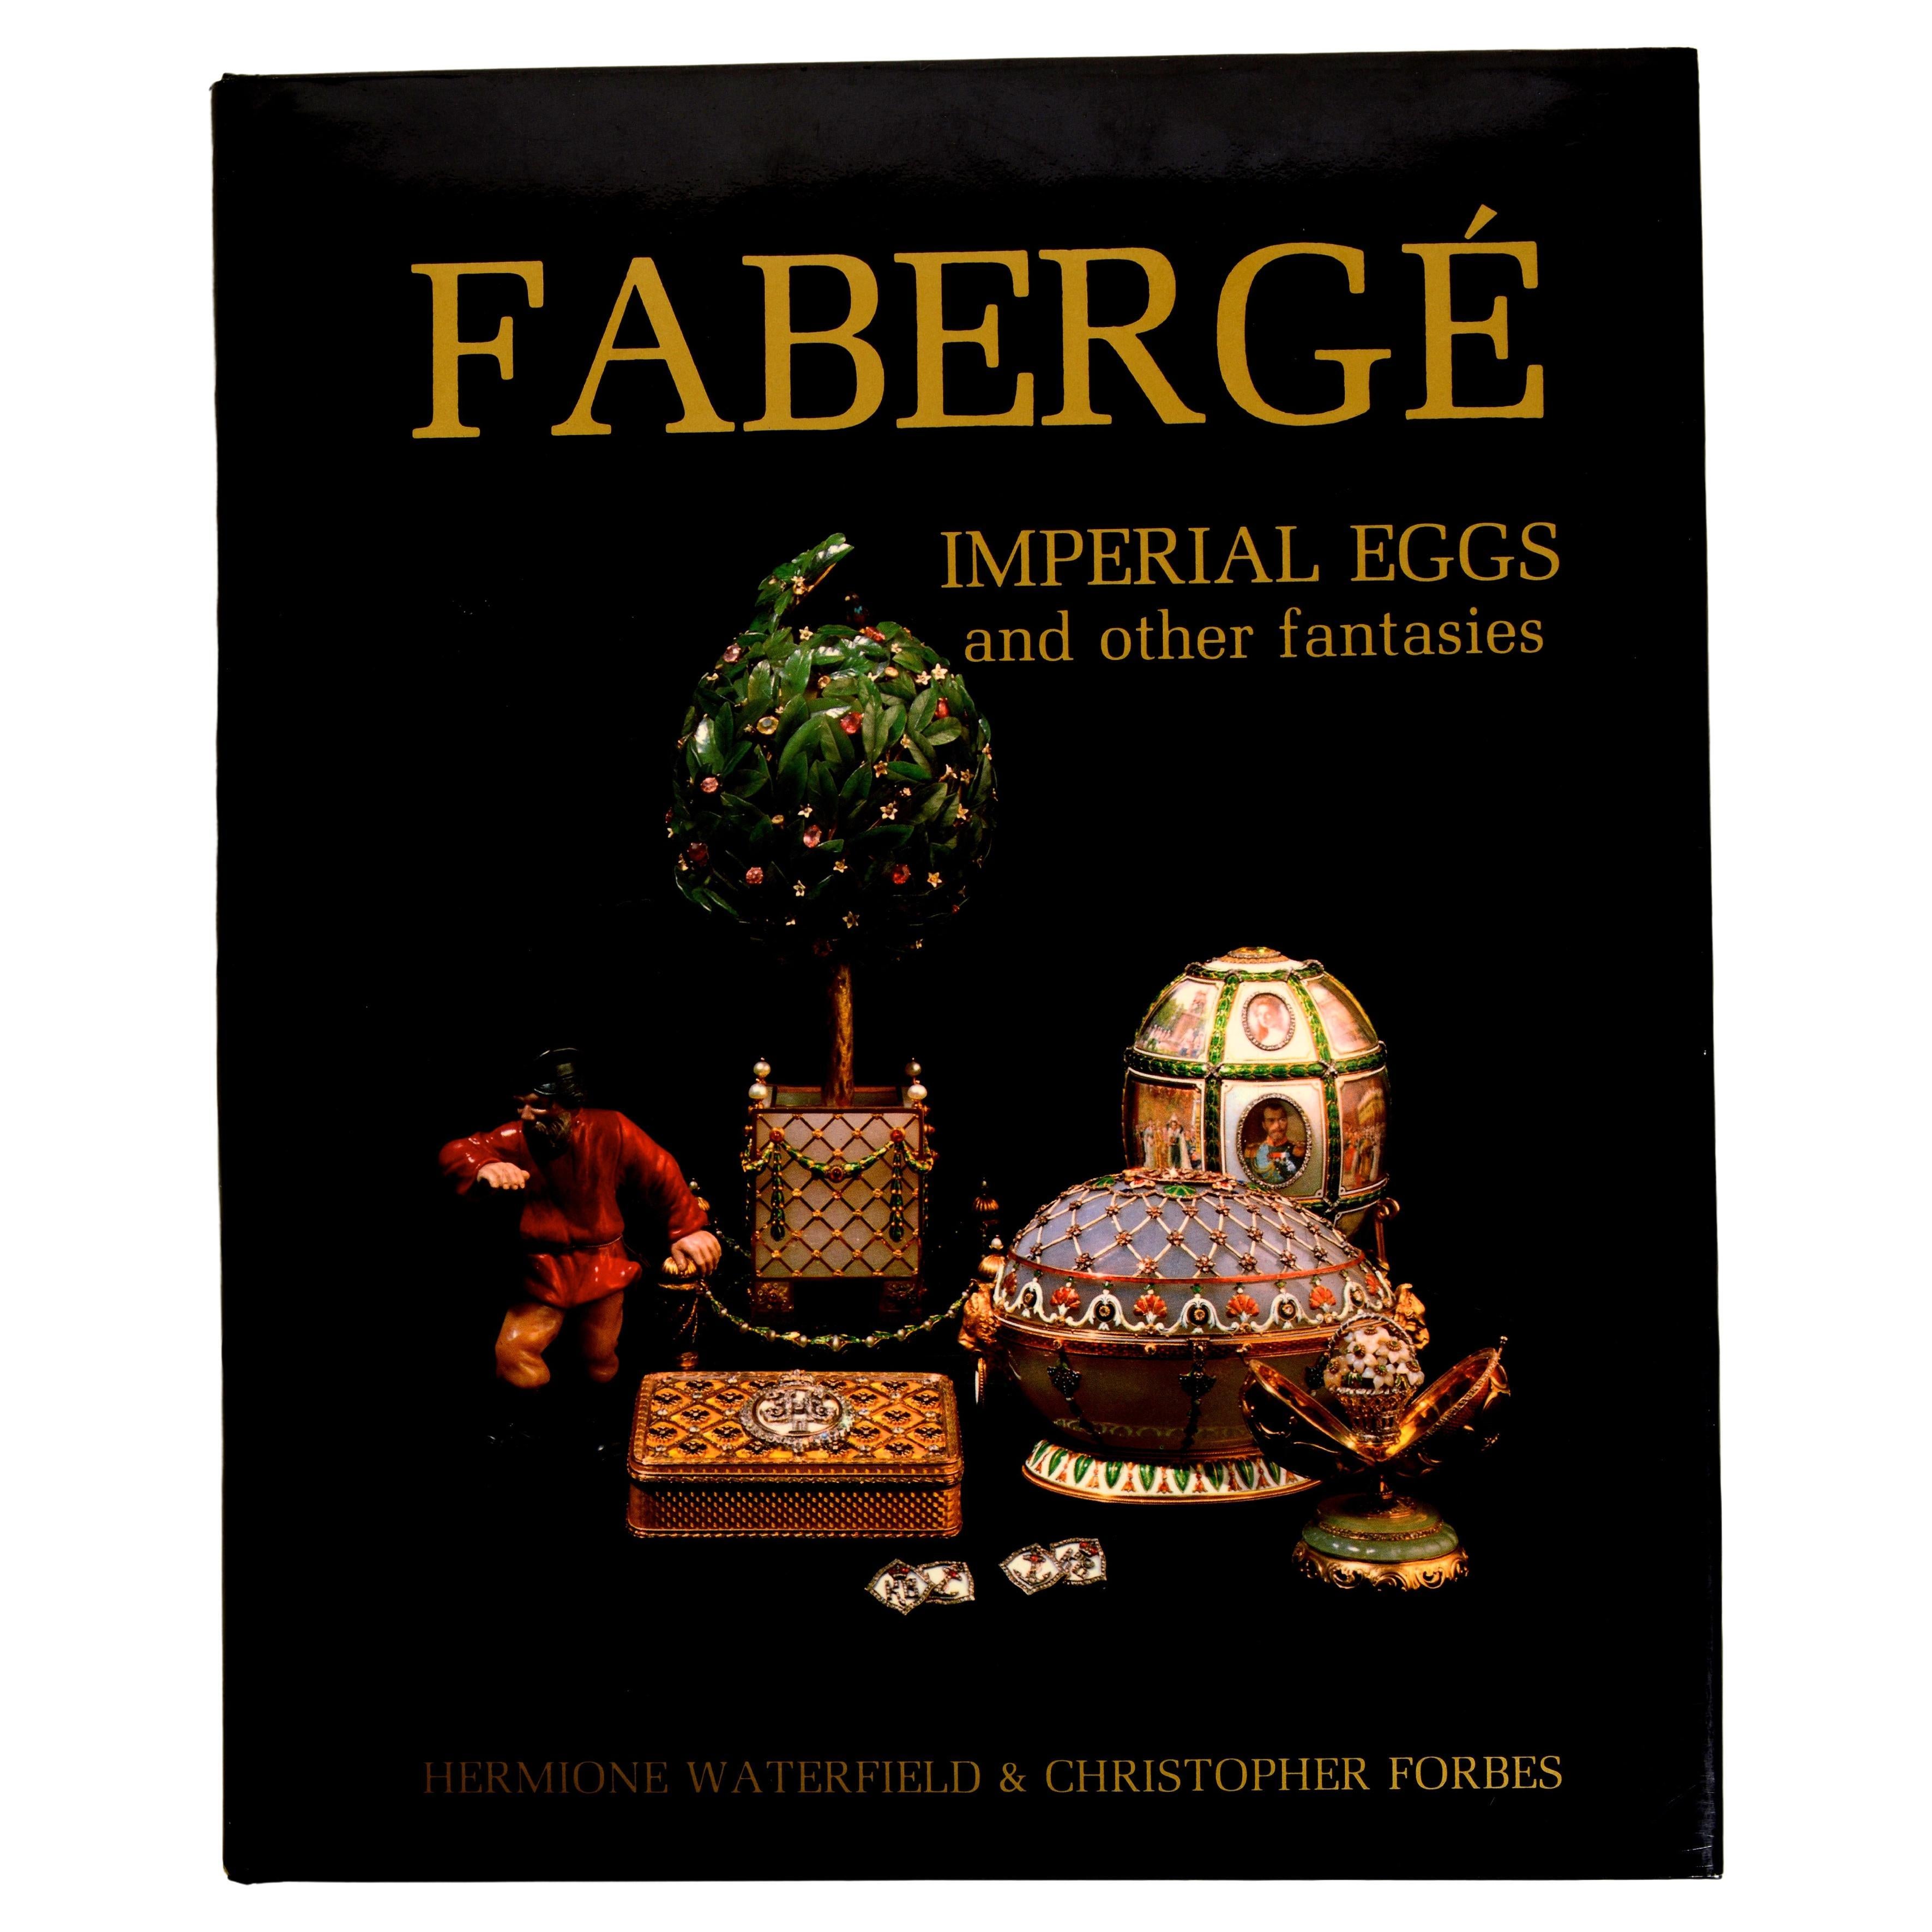 Fabergé: Imperial Eggs and Other Fantasies by Hermione Waterfield For Sale